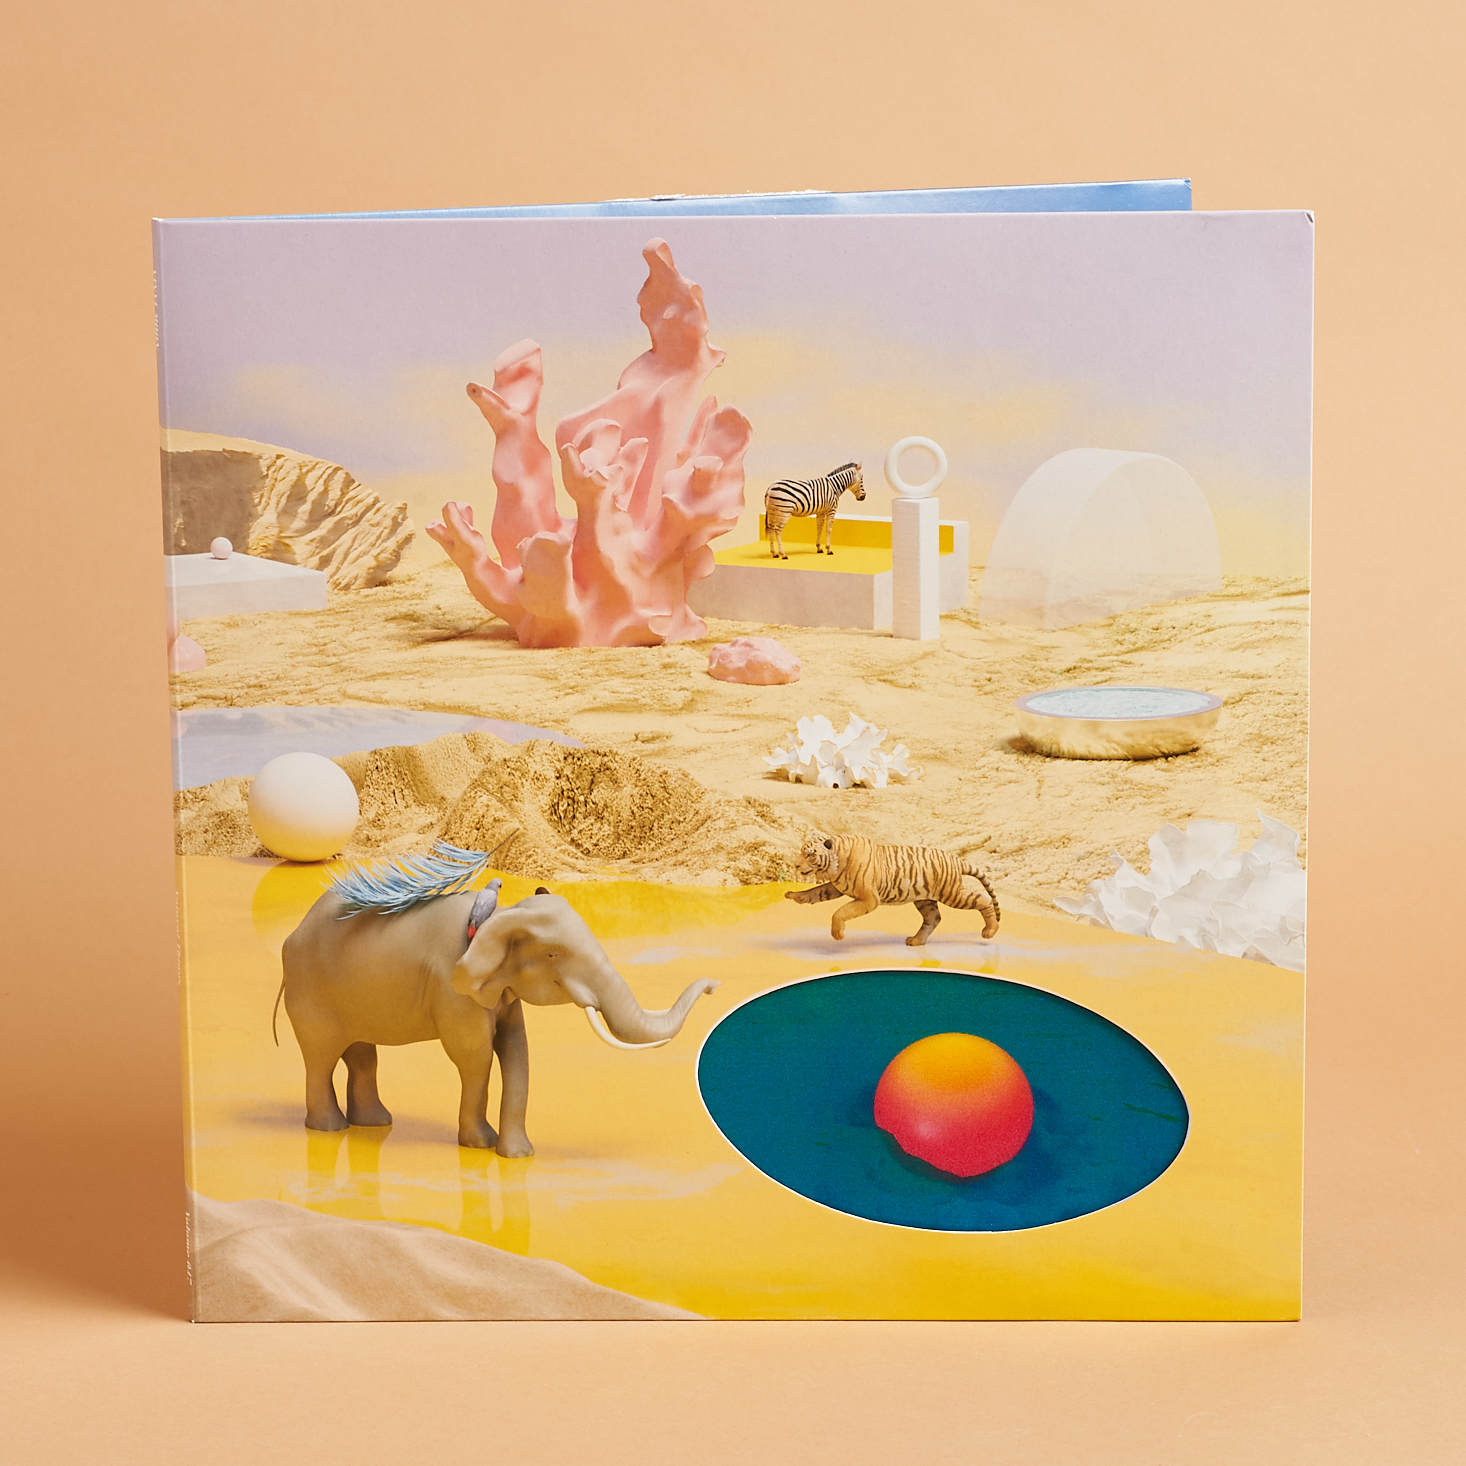 Cover of Vinyl Moon Volume 47 with wild animals against a pastel landscape